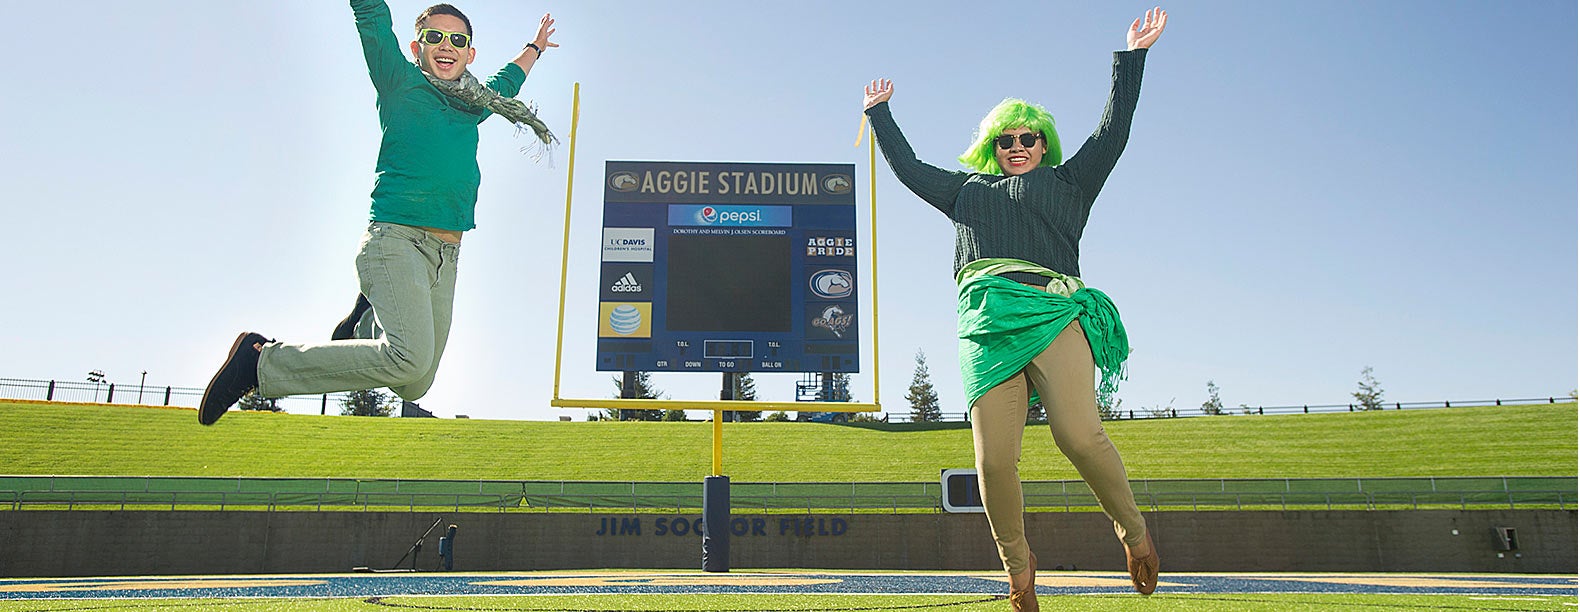  A woman and a man dressed in several pieces of green clothing pose in front of the Aggie Stadium scoreboard